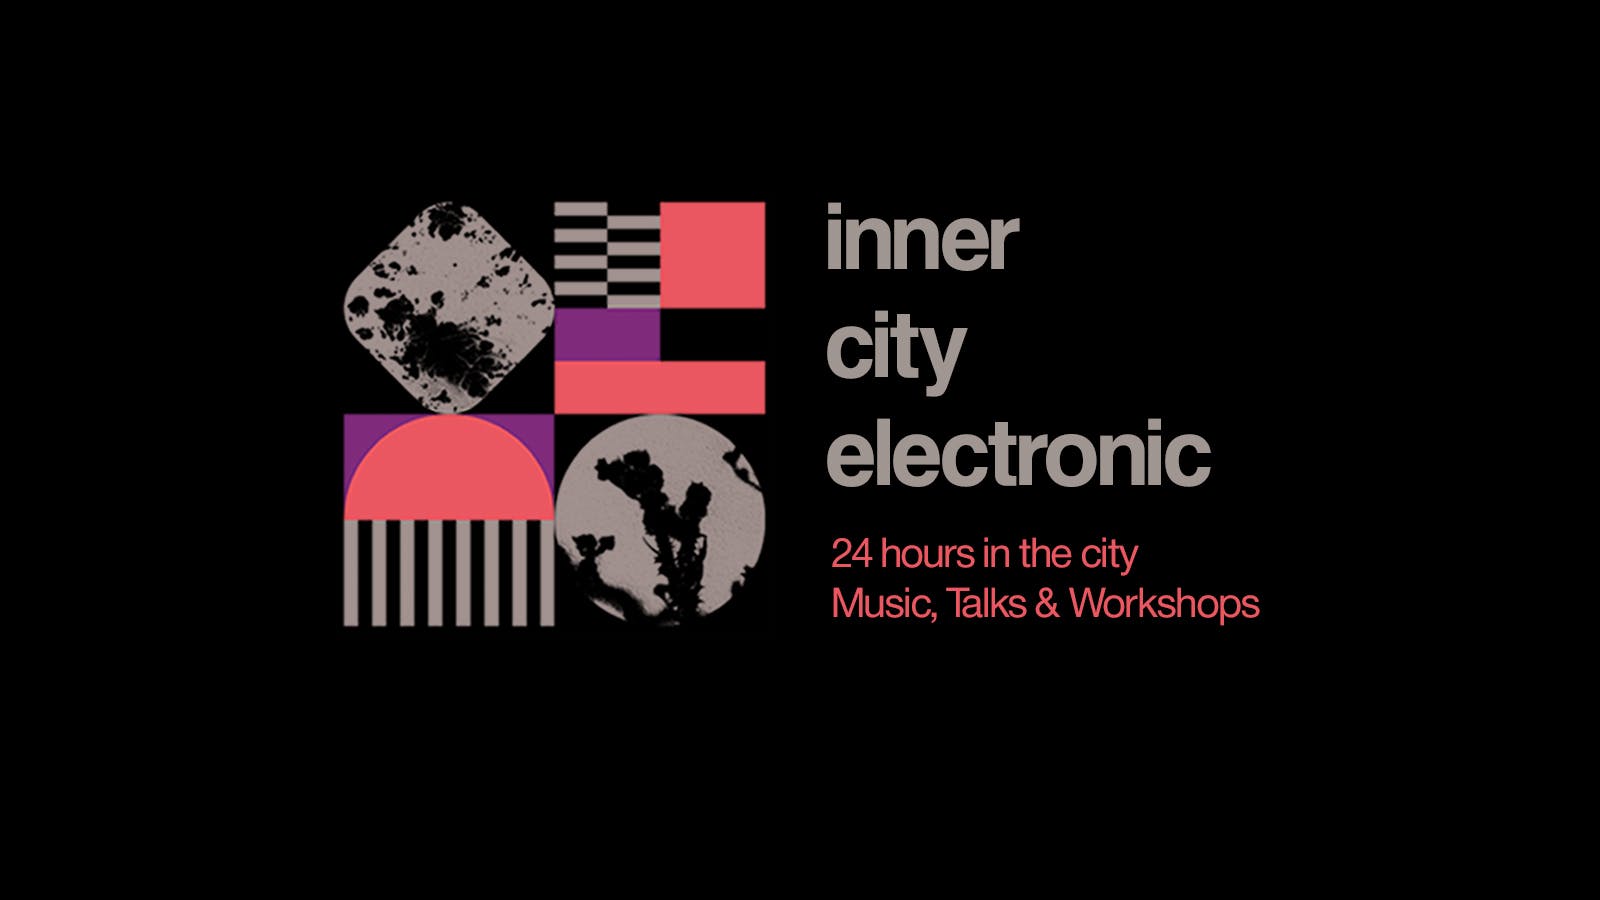 A Chat With: Ben Thompson of inner city electronic